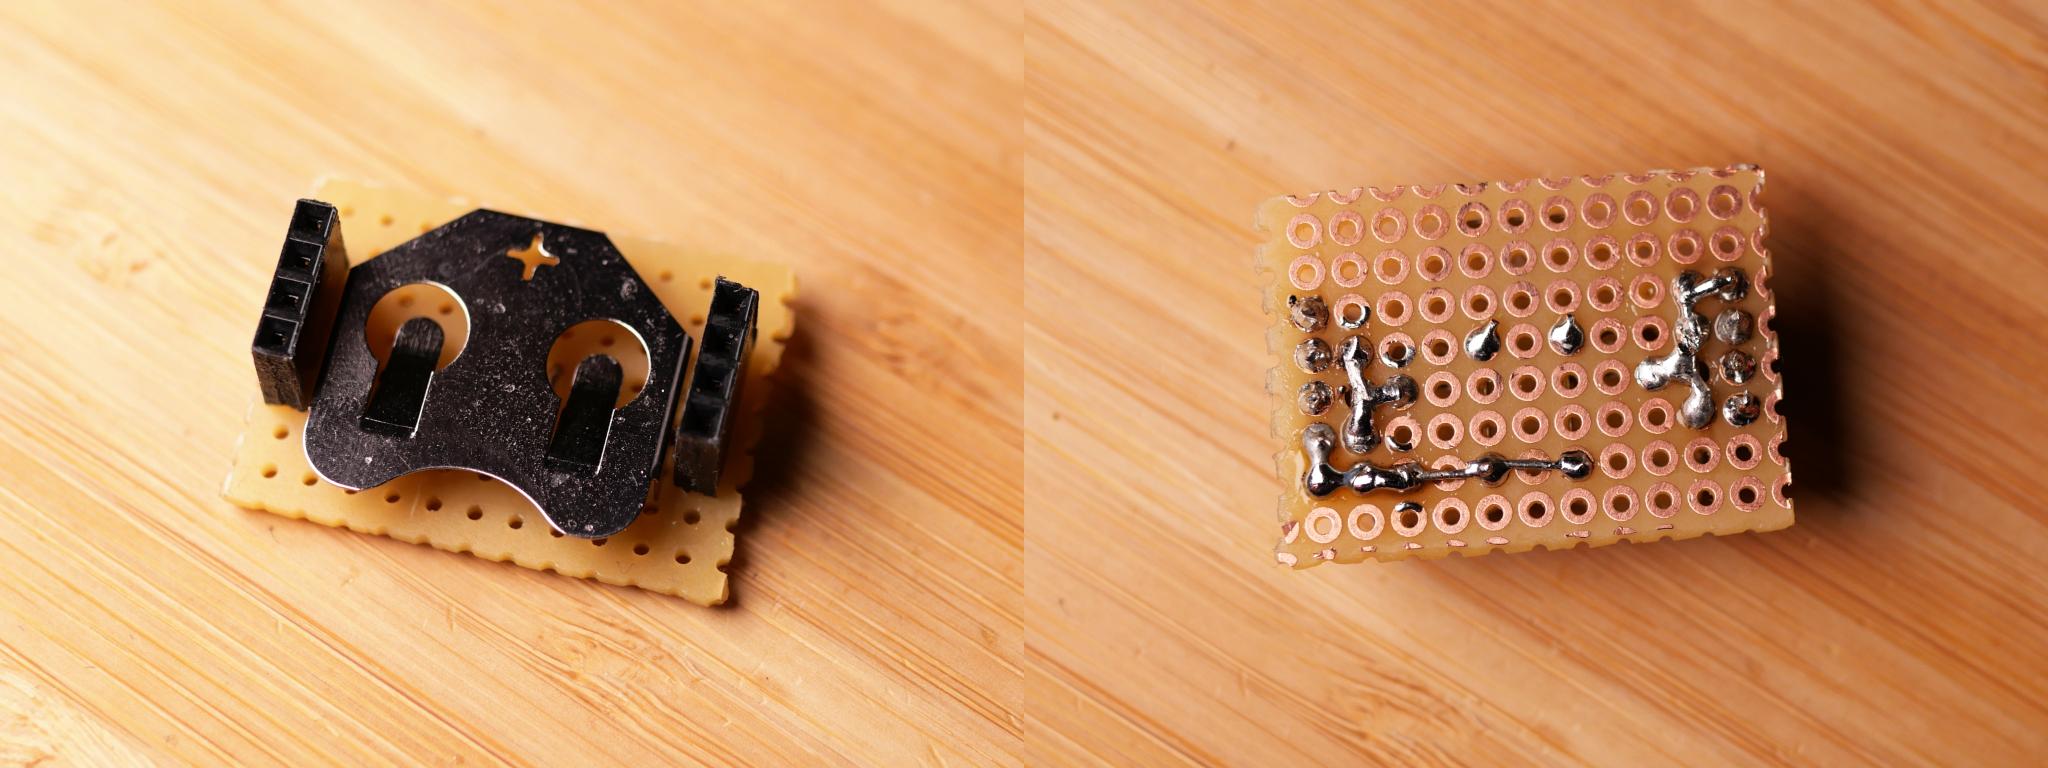 Front and back of the perfboard with the battery holder